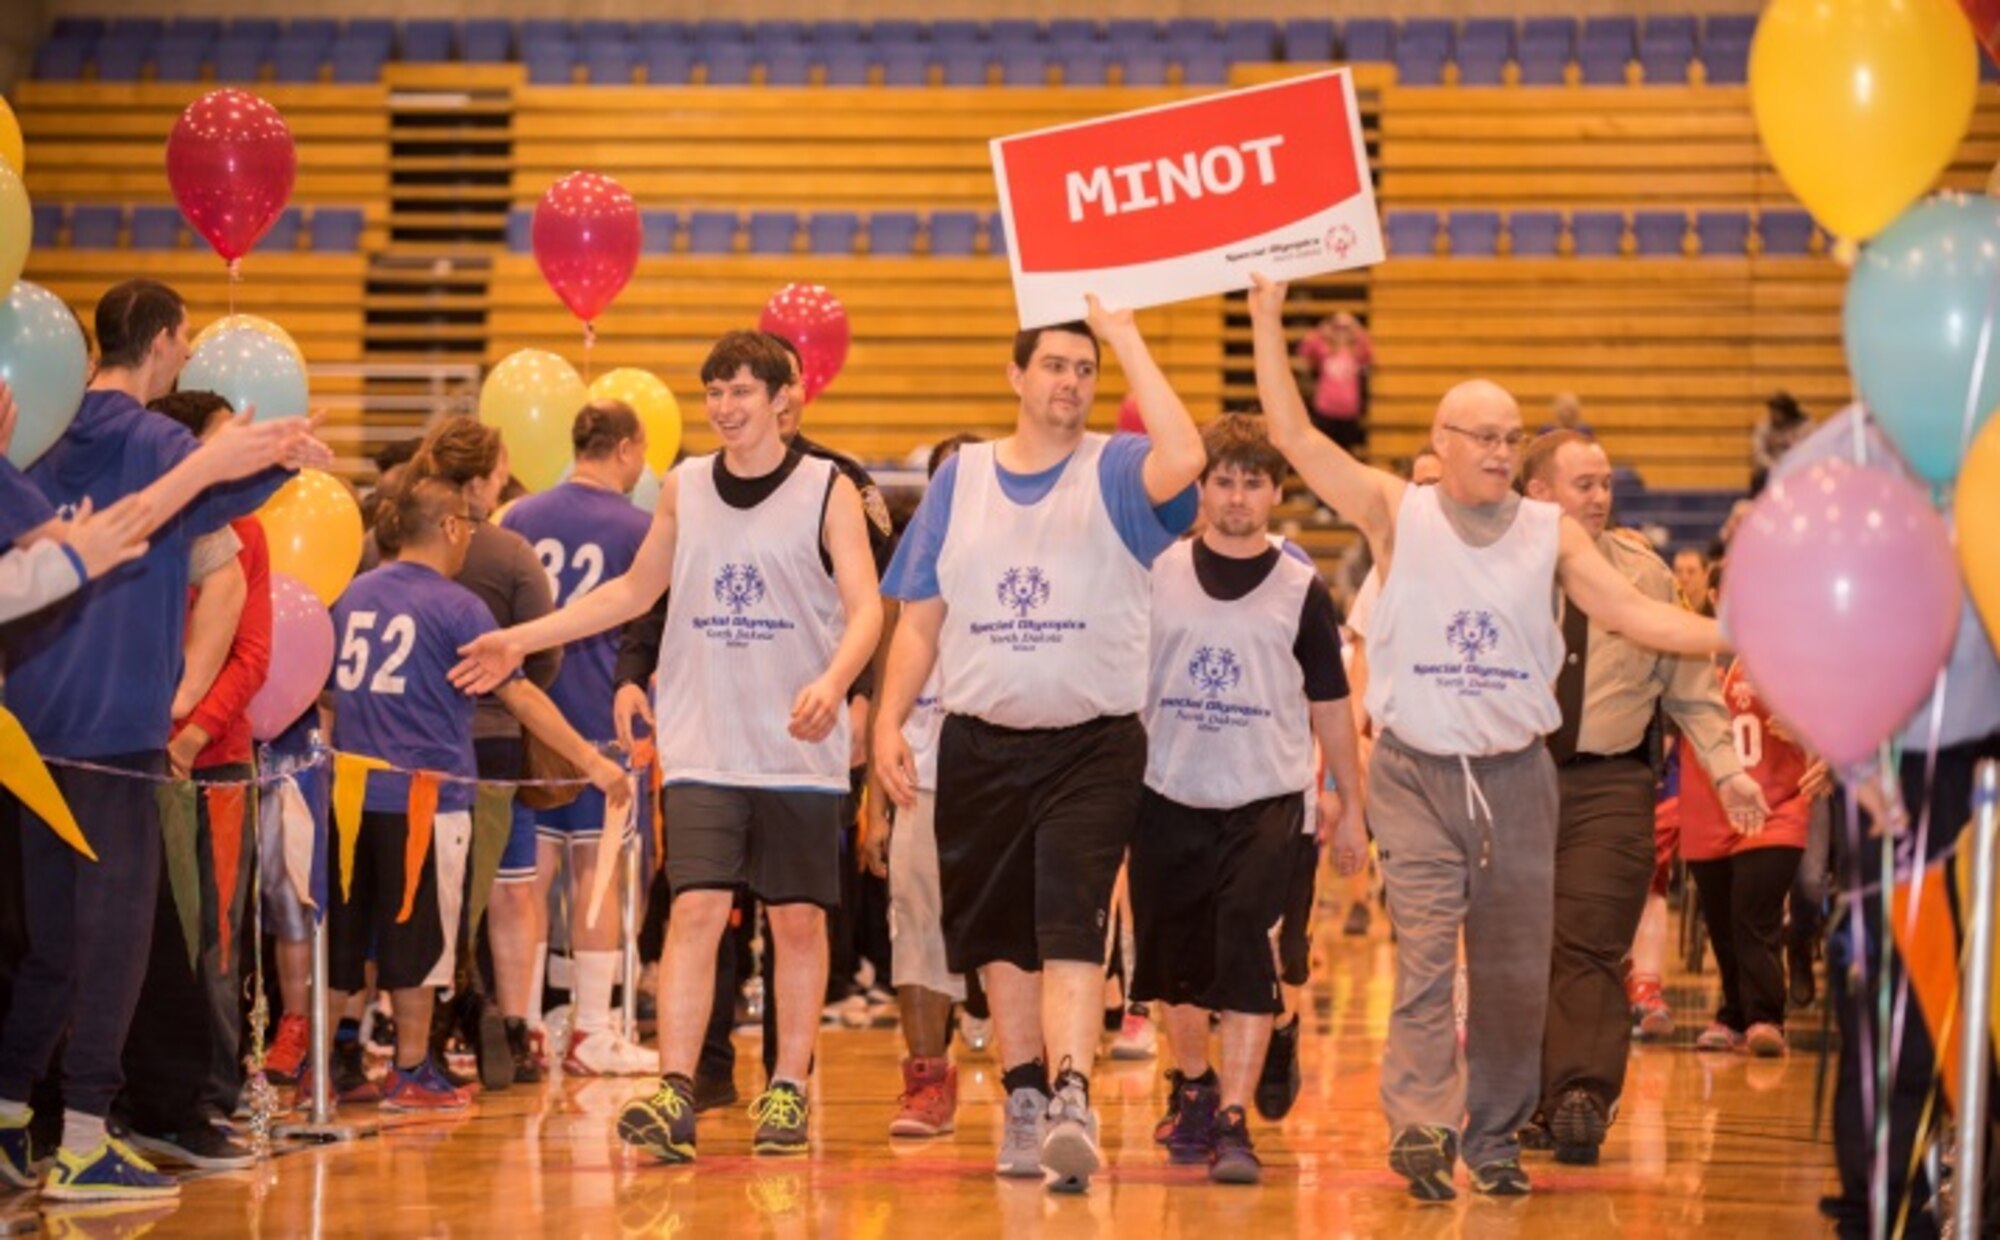 Members of the Minot Special Olympics team high-five other participants as their team is introduced at the North Dakota Special Olympics in Minot, N.D., March 4, 2016. Minot Air Force Base members volunteered at the event as referees and other volunteer positions. (U.S. Air Force photo/Airman 1st Class Christian Sullivan)